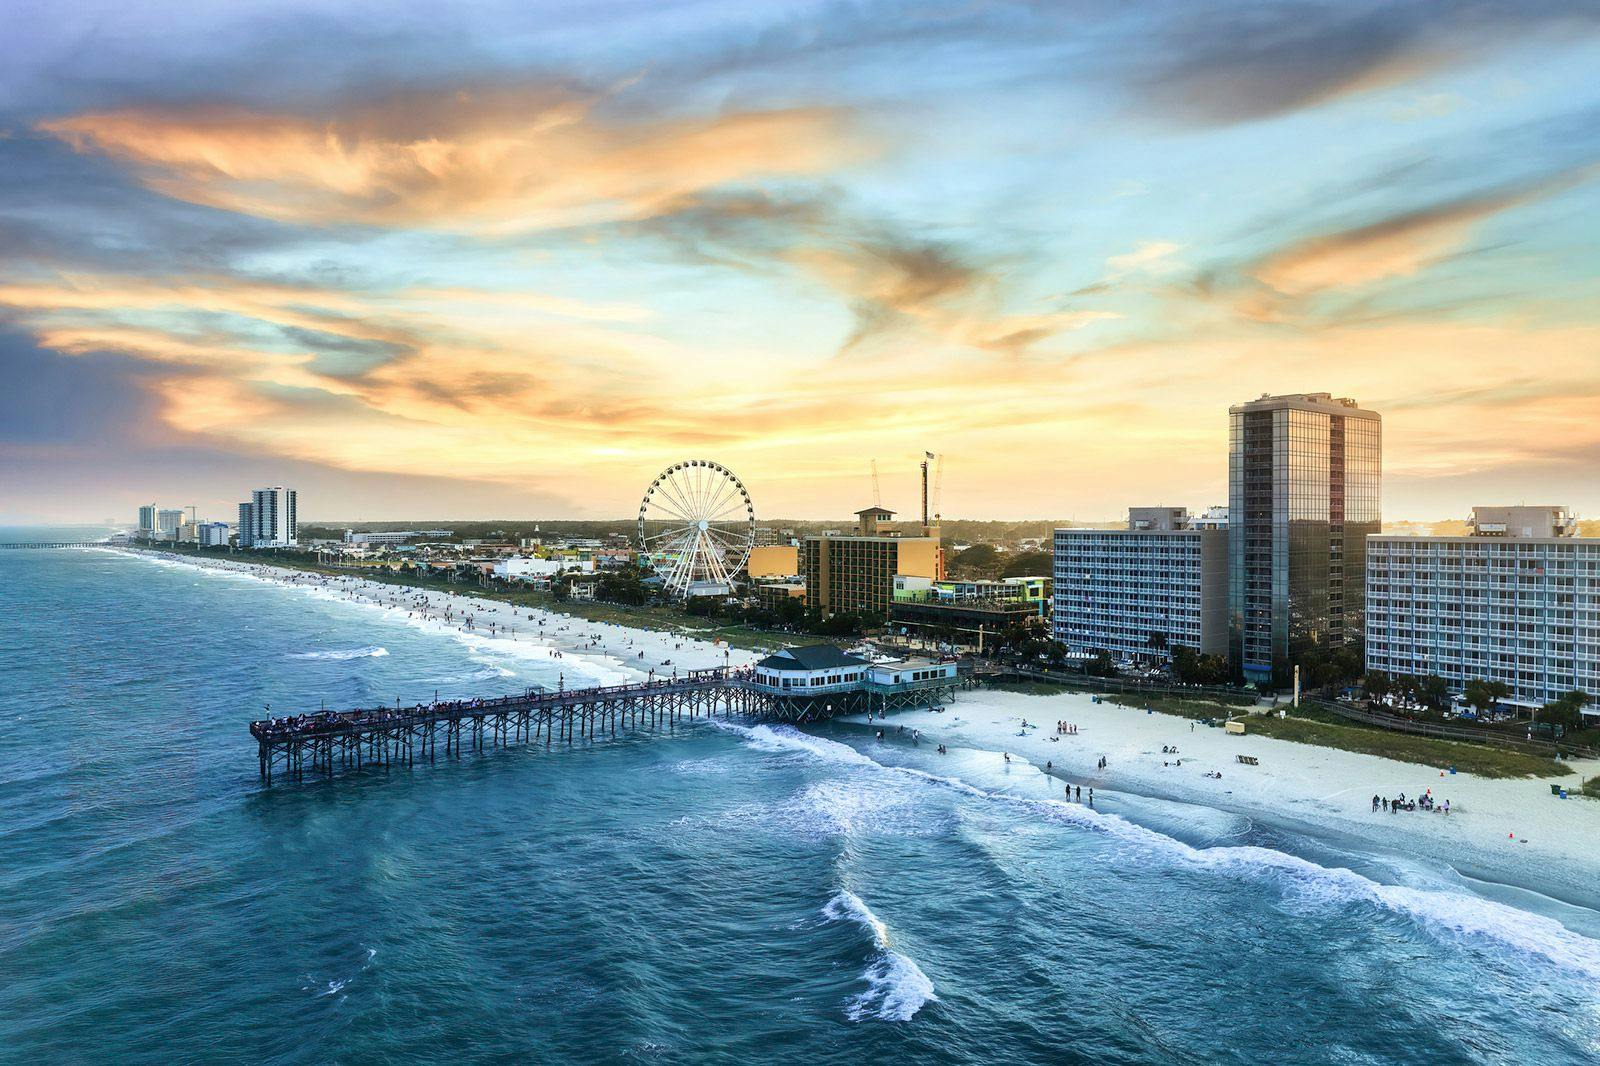 Myrtle Beach seafront and boardwalk in South Carolina 